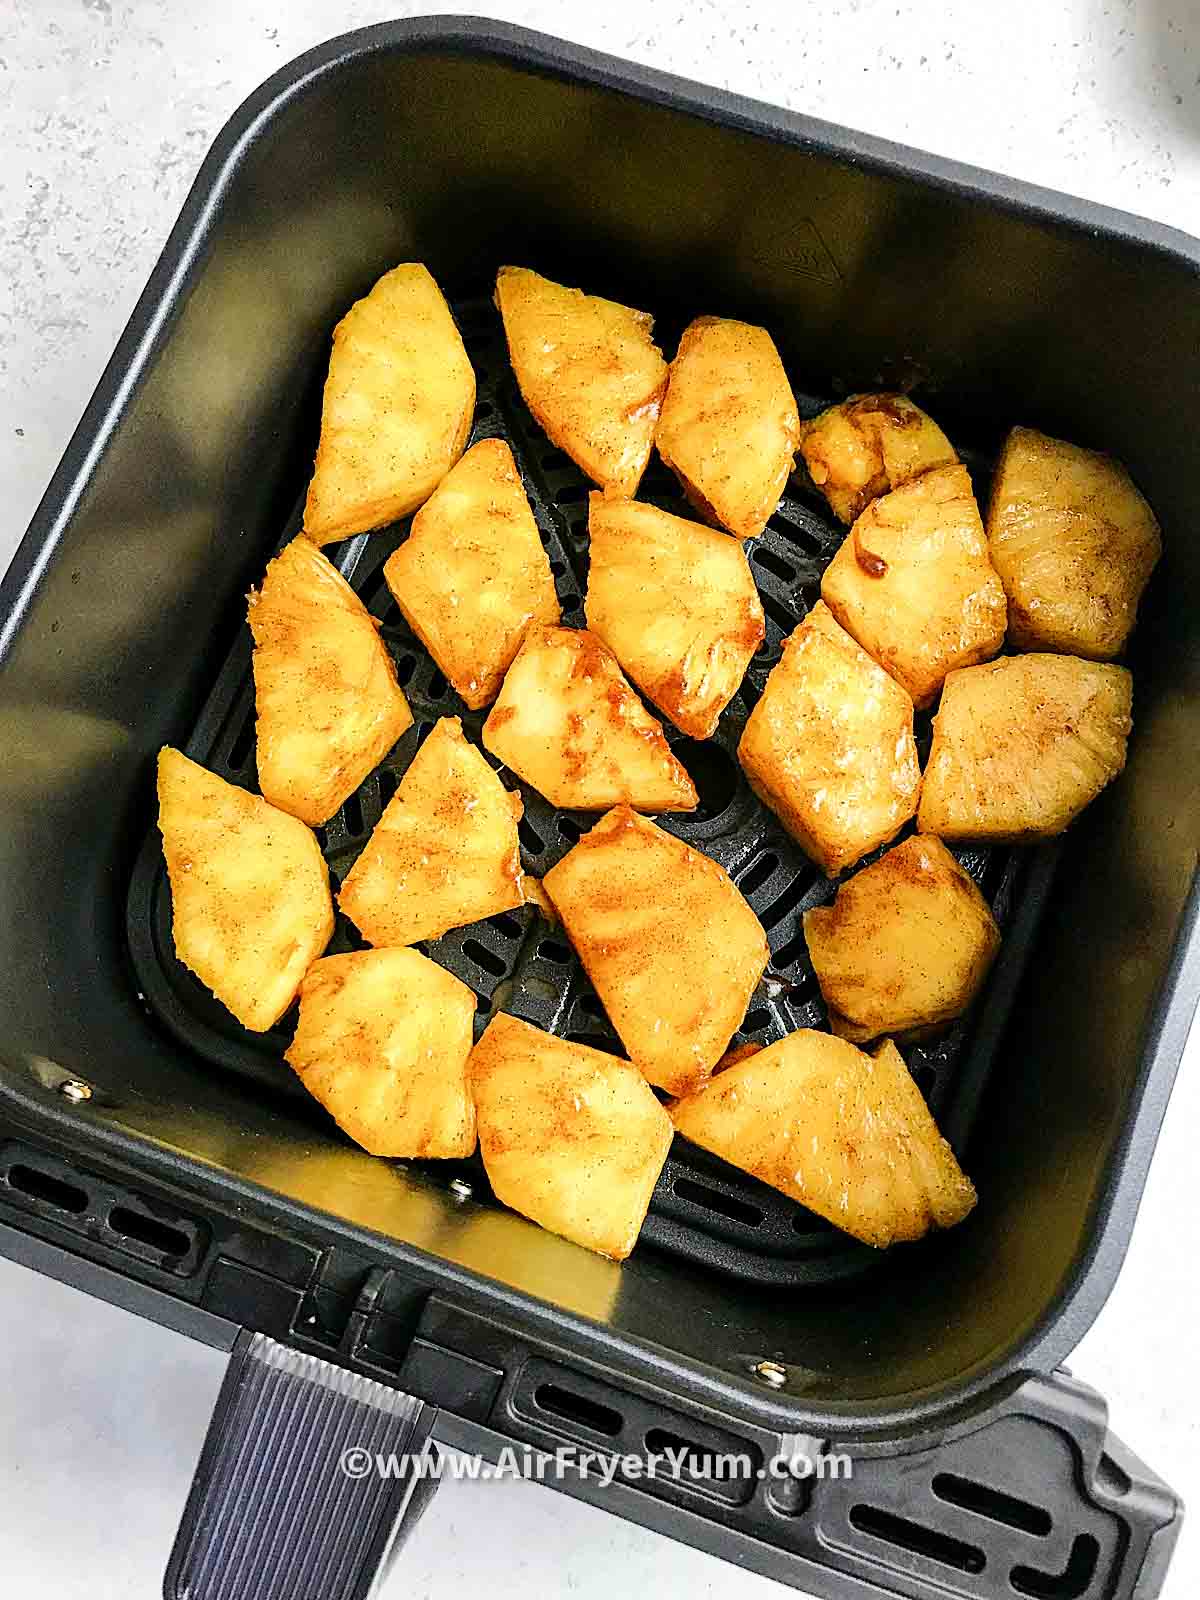 Fresh pineapple chunks glazed with cinnamon and brown sugar in a black air fryer basket.